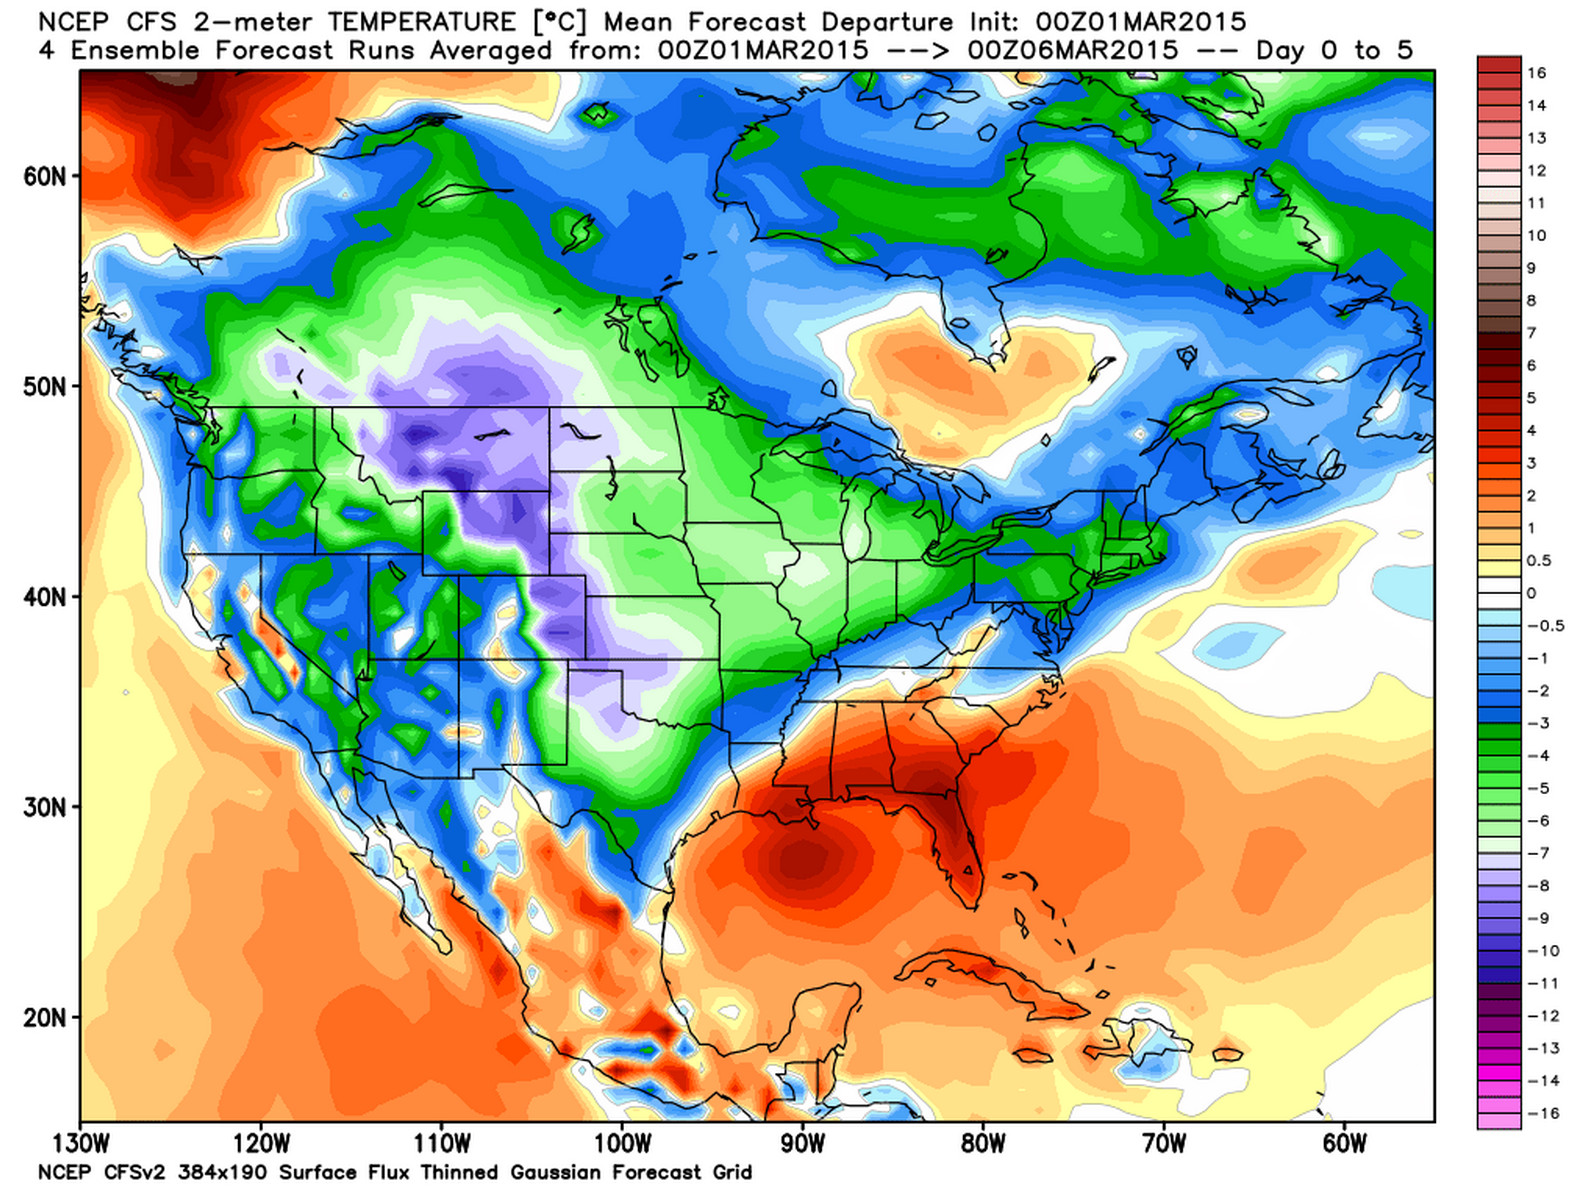 CFS 2-meter temperature anomaly forecast | WeatherBell Analytics